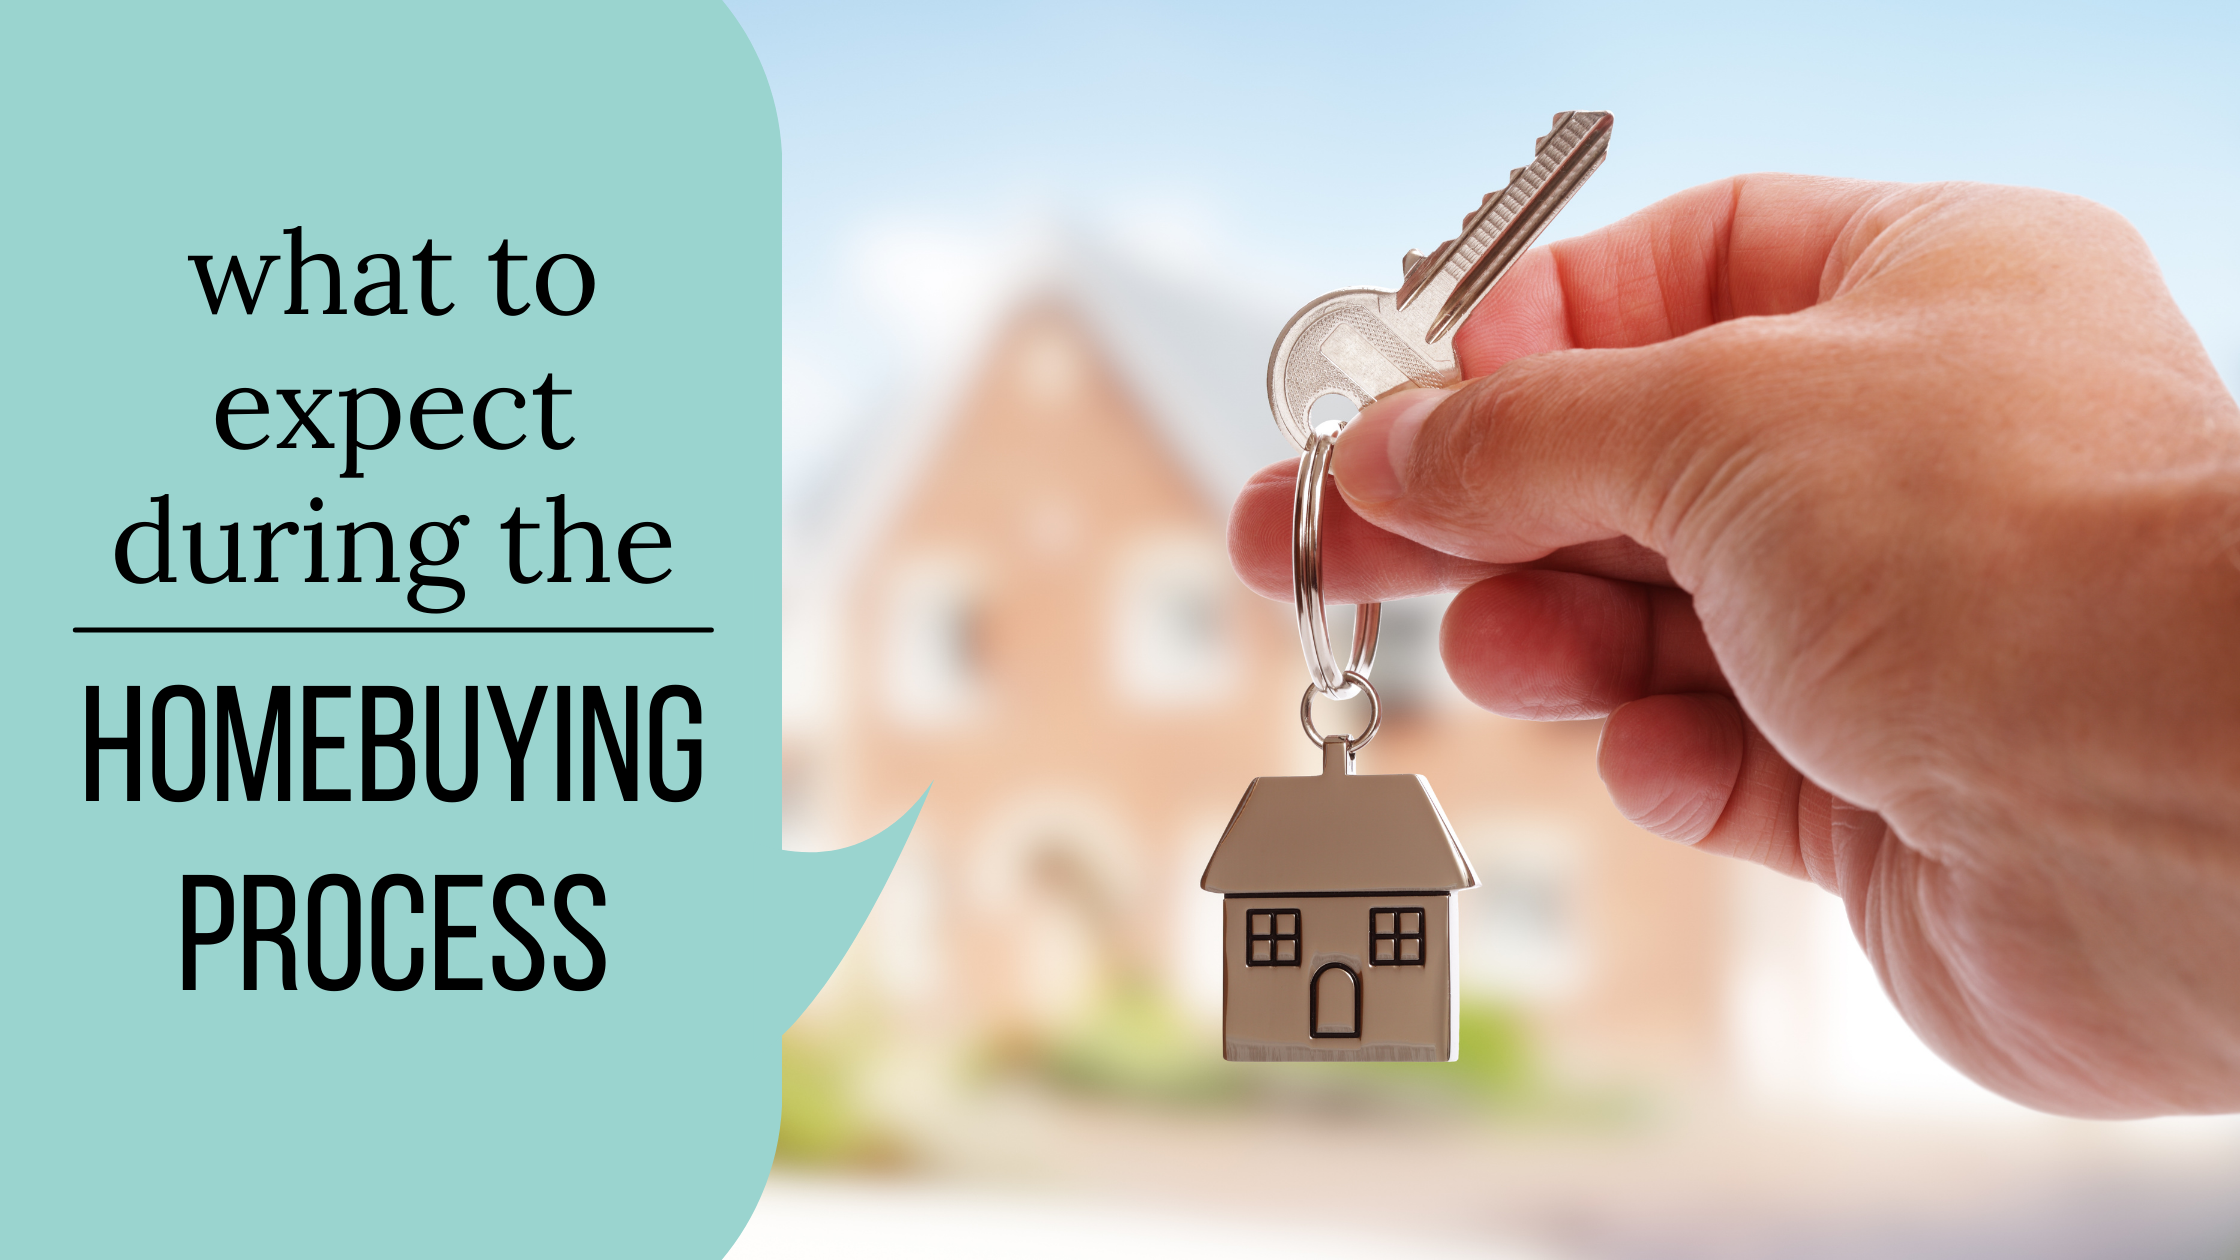 What to Expect During the Homebuying Process